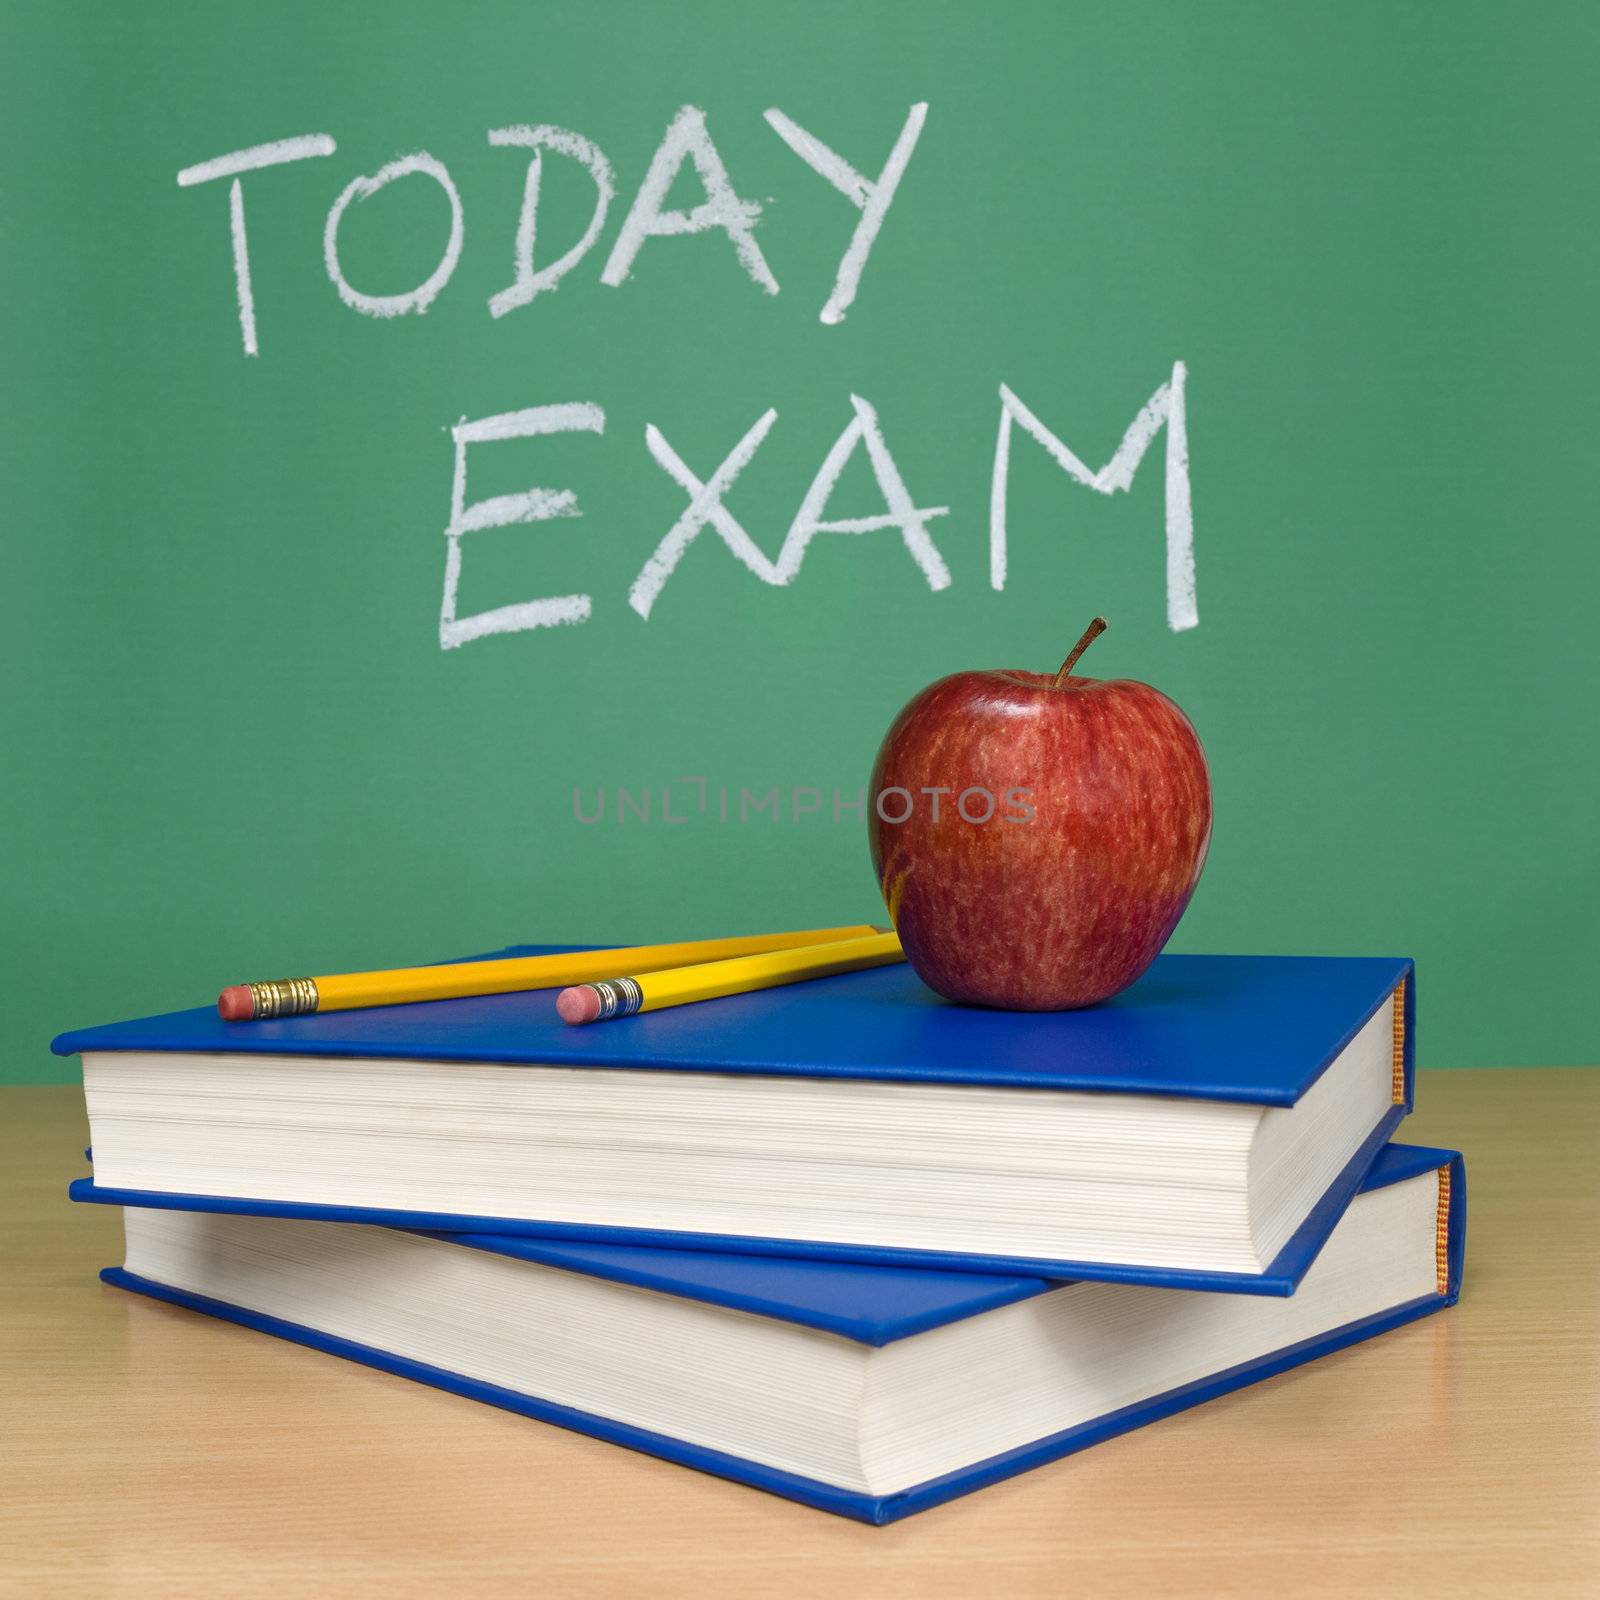 Today exam written on a chalkboard. Books, pencils and an apple on foreground.